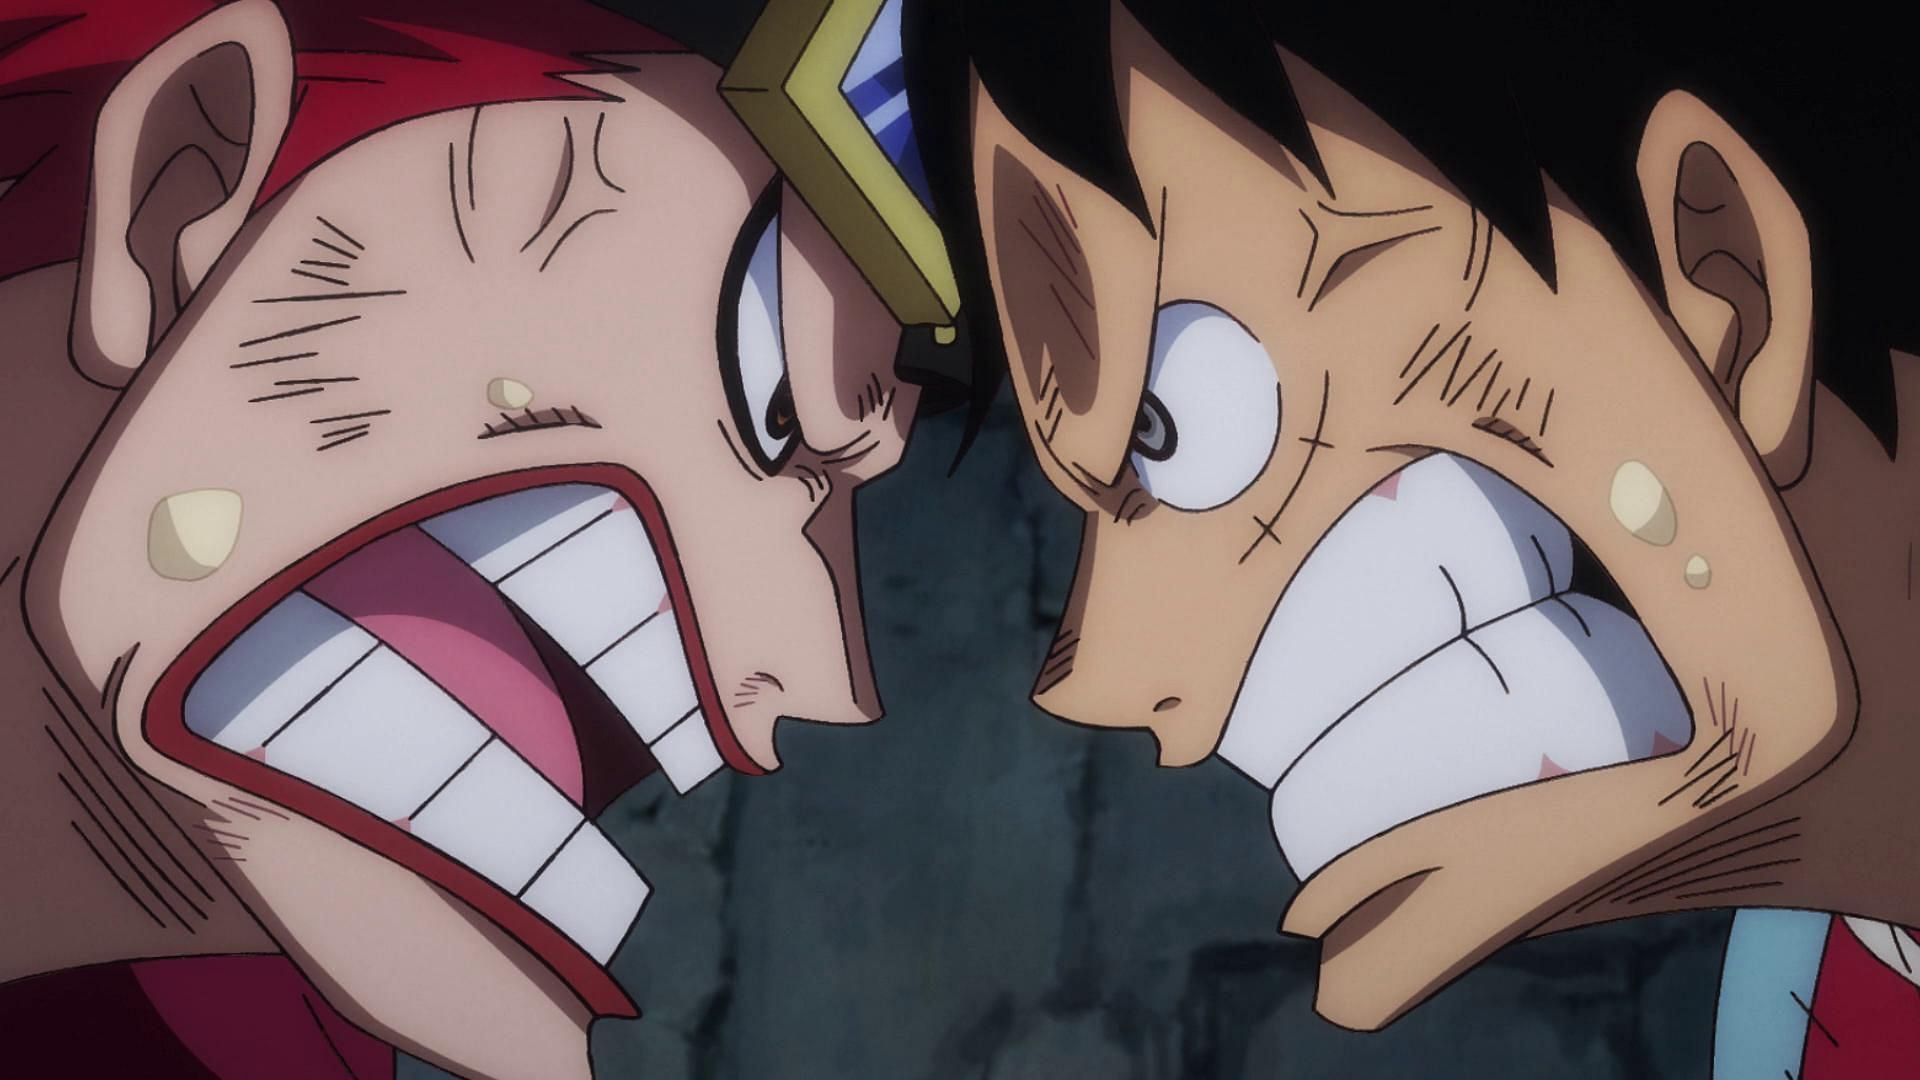 Despite their efforts, Kid and Law could never compete with Luffy (Image via Toei Animation, One Piece)